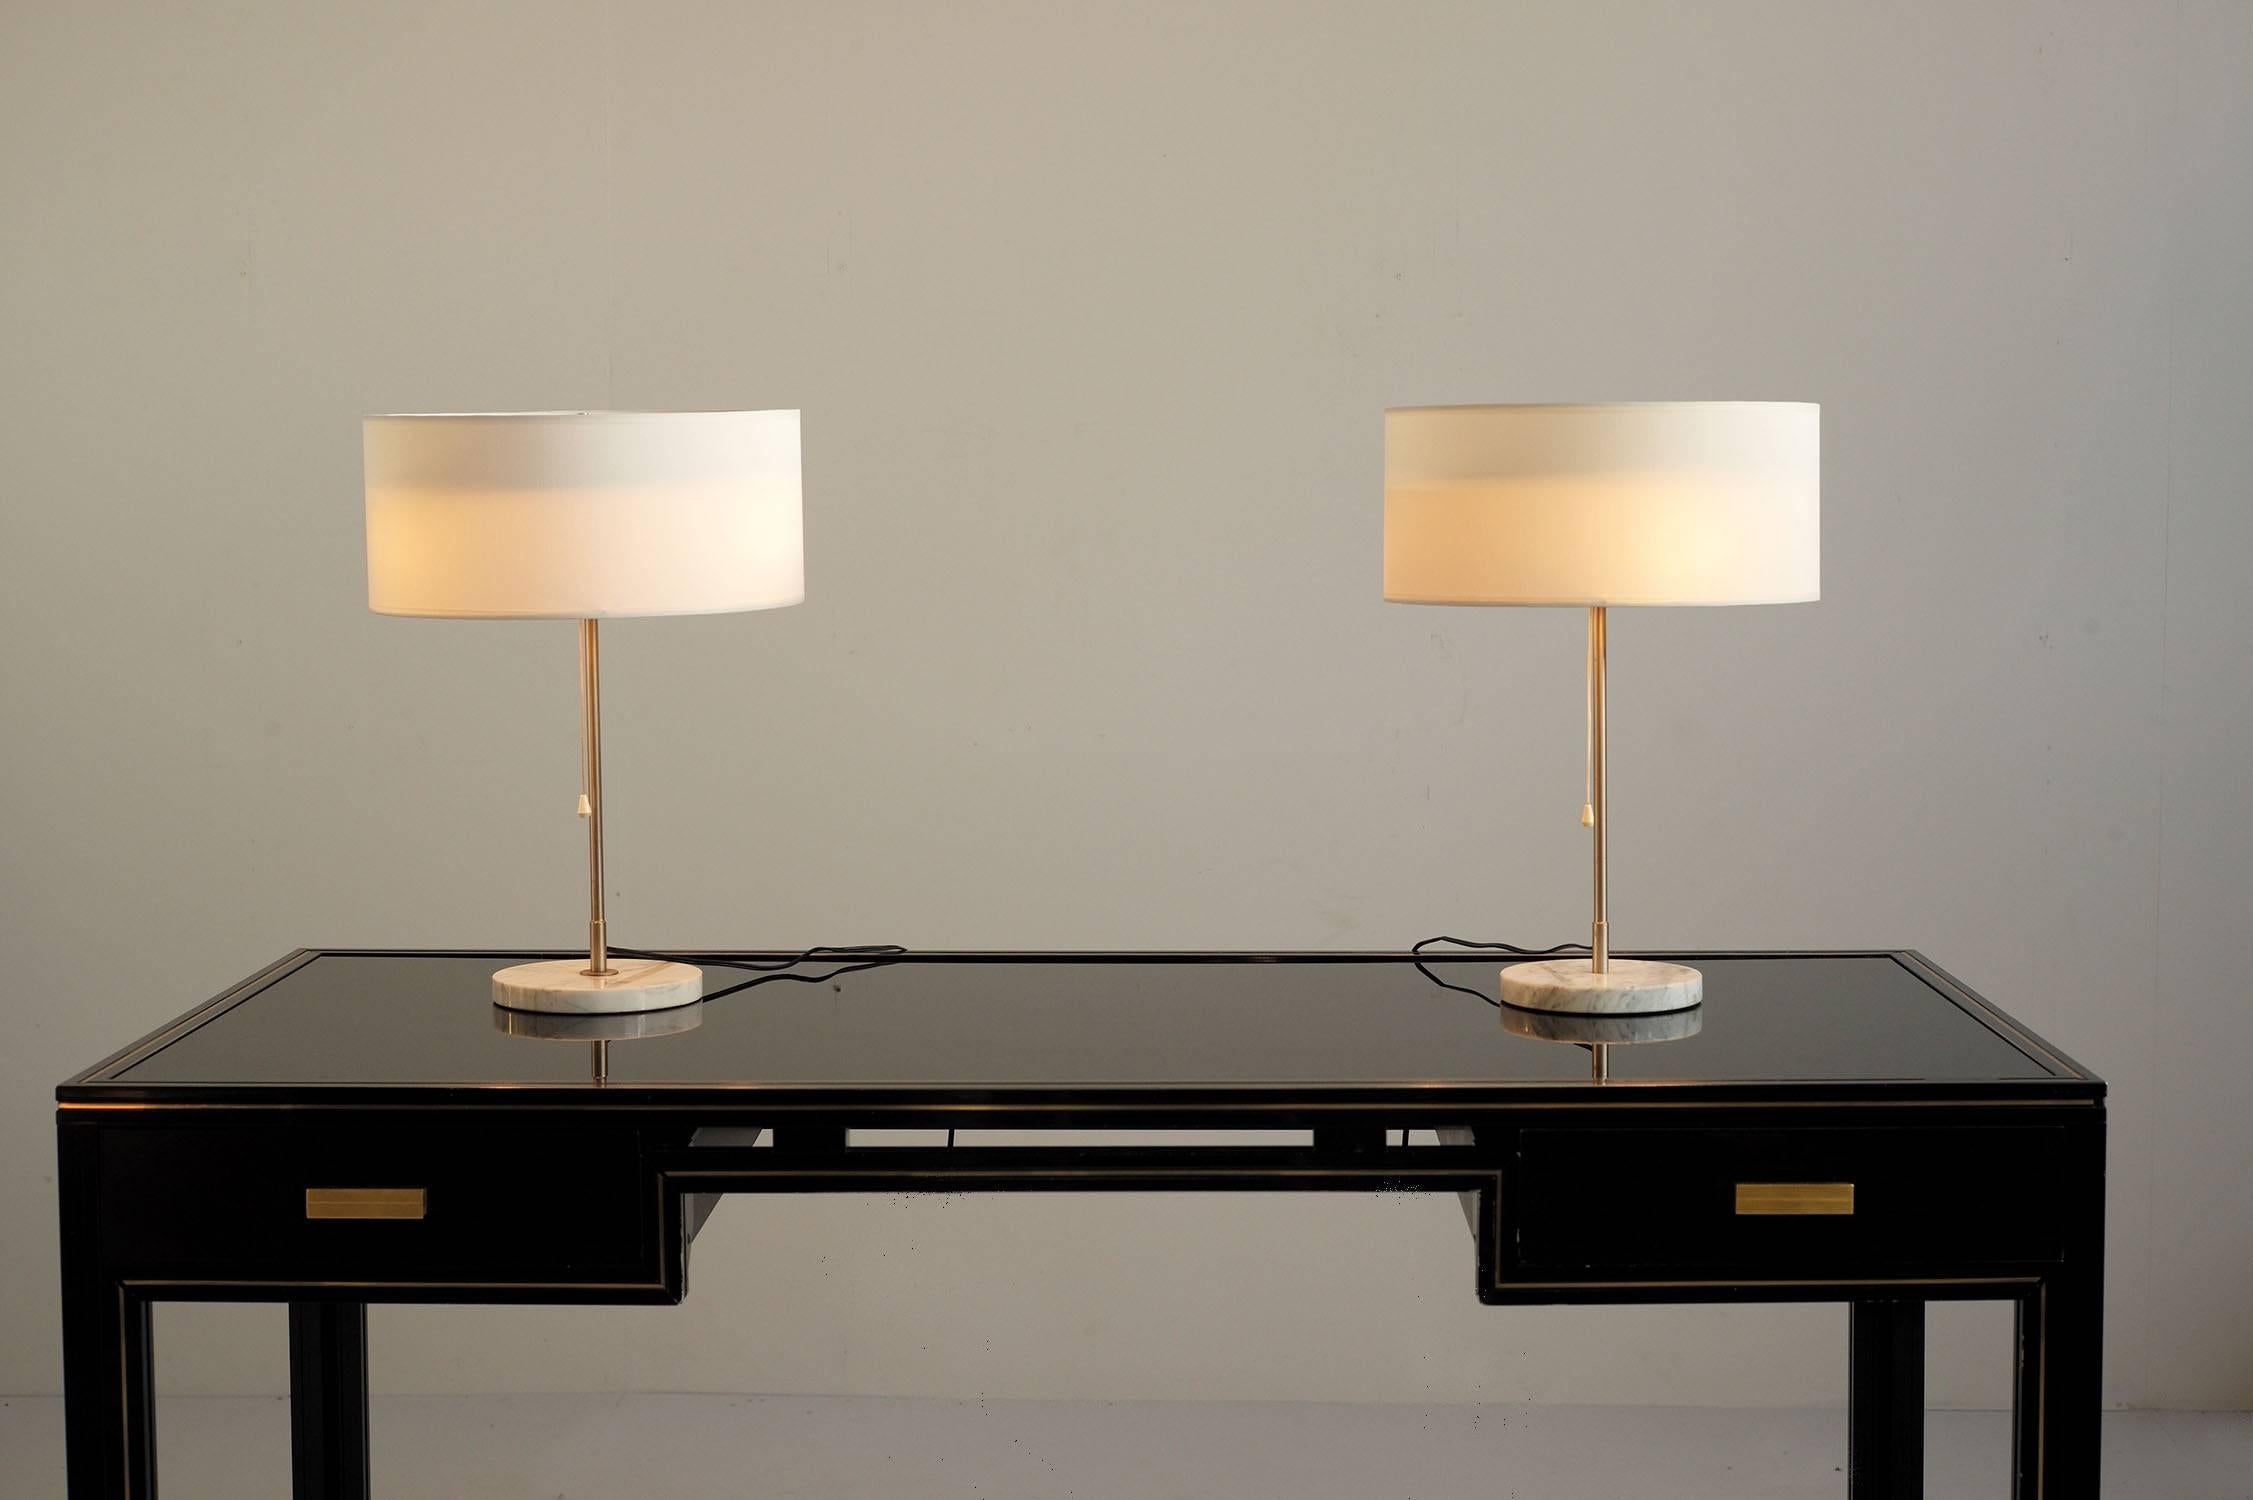 Alain Richard; rare pair of table lamps for Pierre Disderot, France, 1960.
Veined marble base, satin stainless steel barrel, lampshade surmounted by a white translucent plexiglass plate. The light is provided by three light bulbs, pull switch.
In